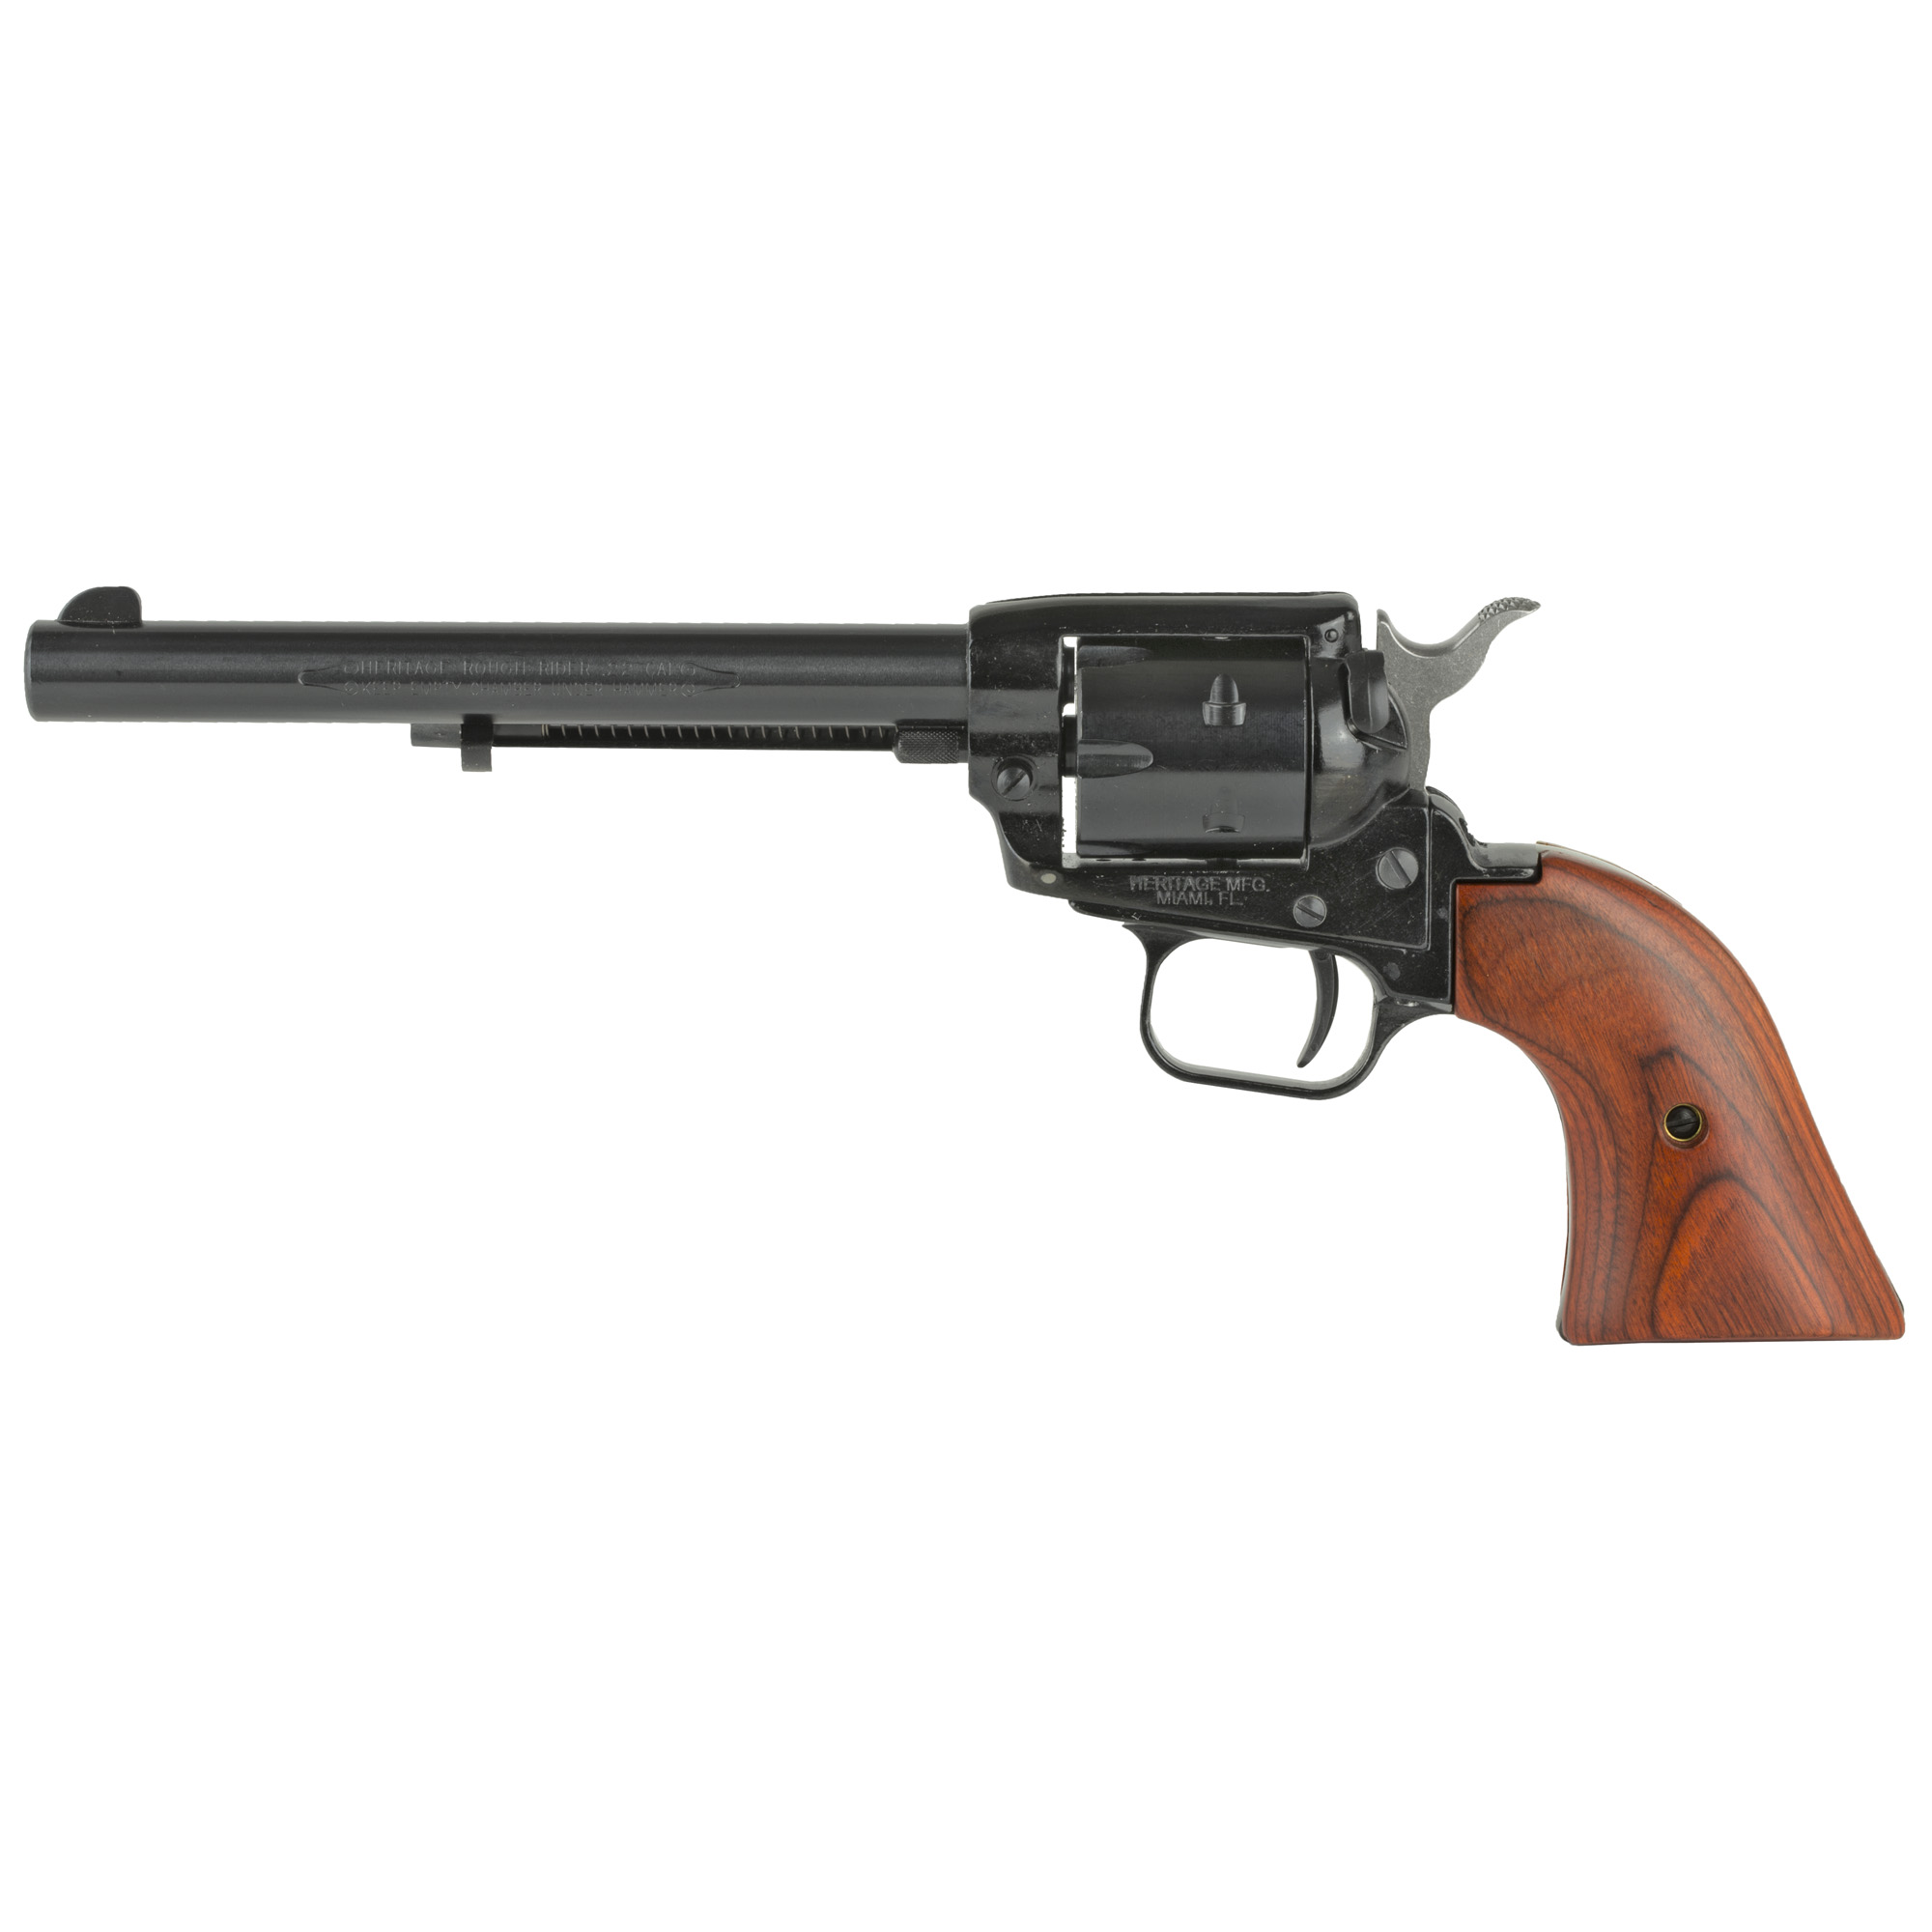 HERITAGE 22LR ONLY 6.5 BL W/COCOB